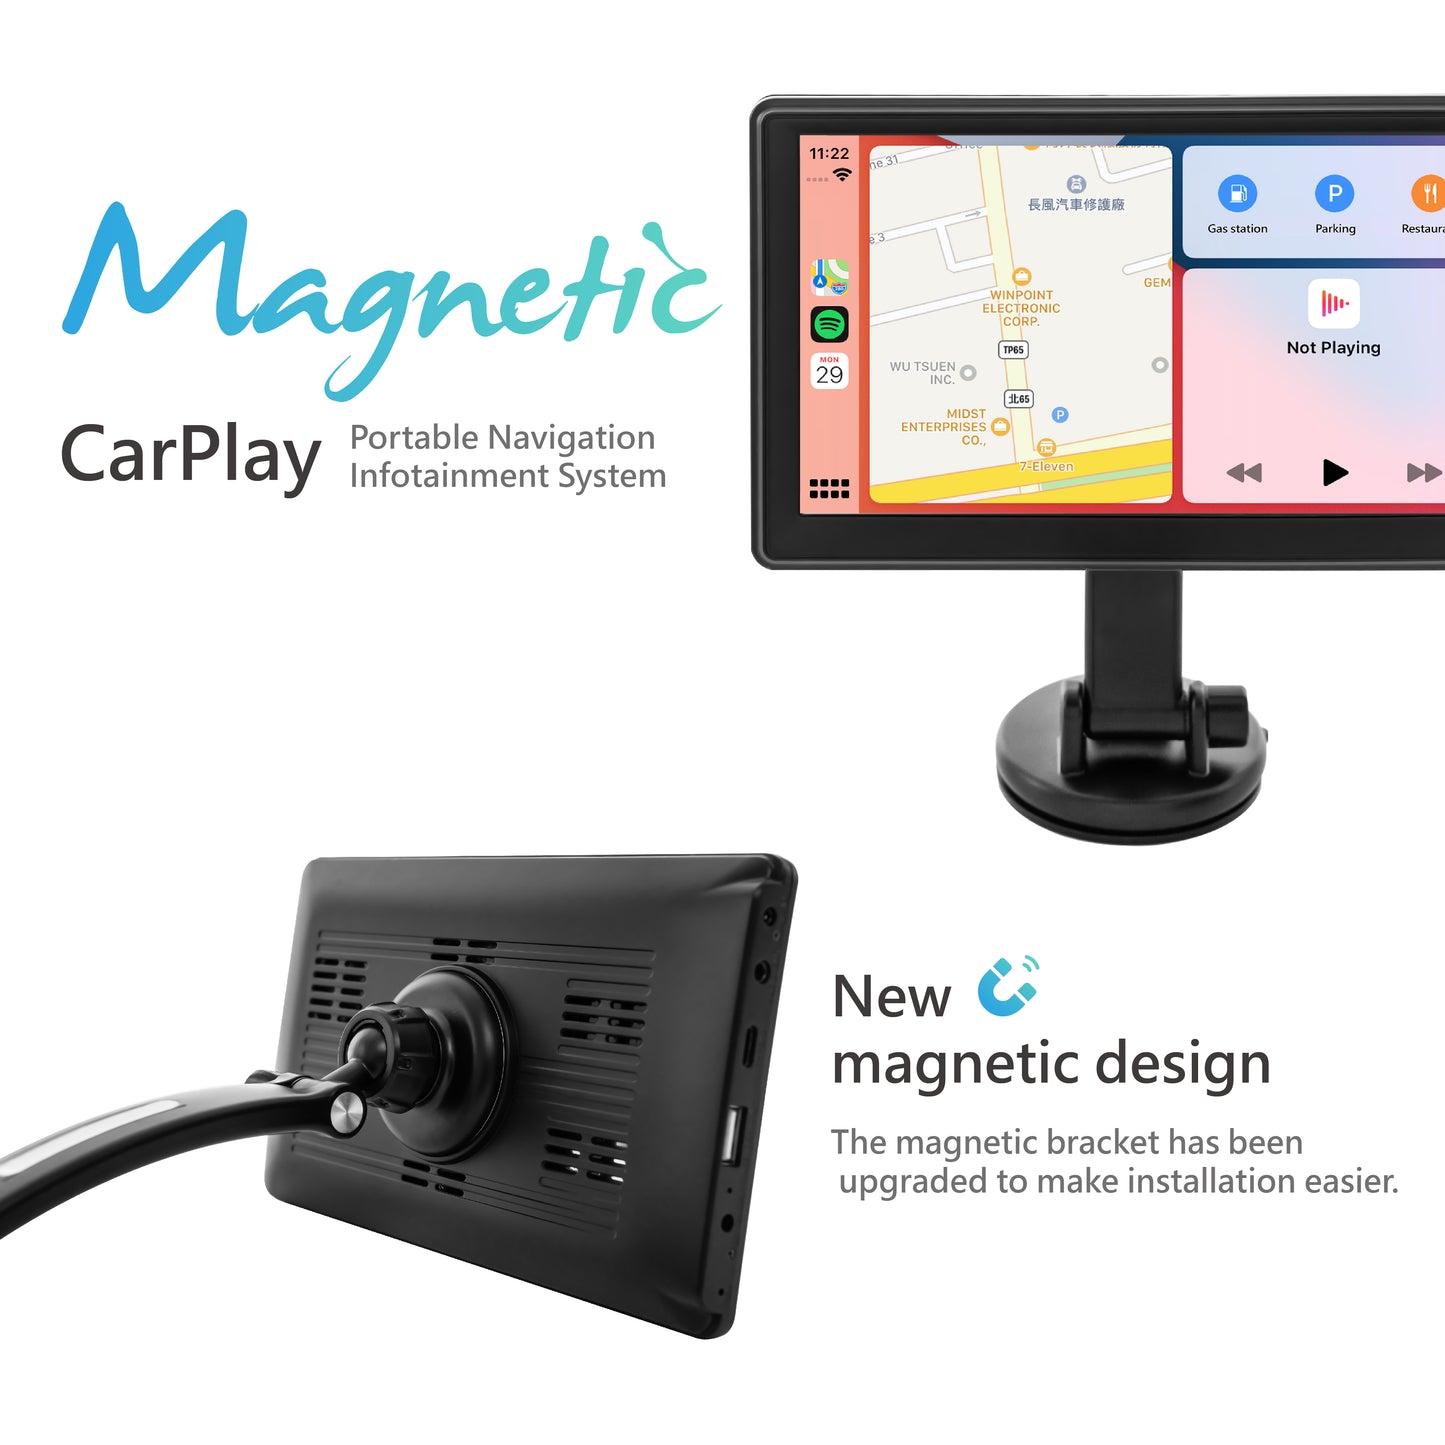 Coral Vision CarPlay Dashboard Console (Slim Light magnetic Version) - Navigation, Communications, Infotainment Quick DIY-installation System